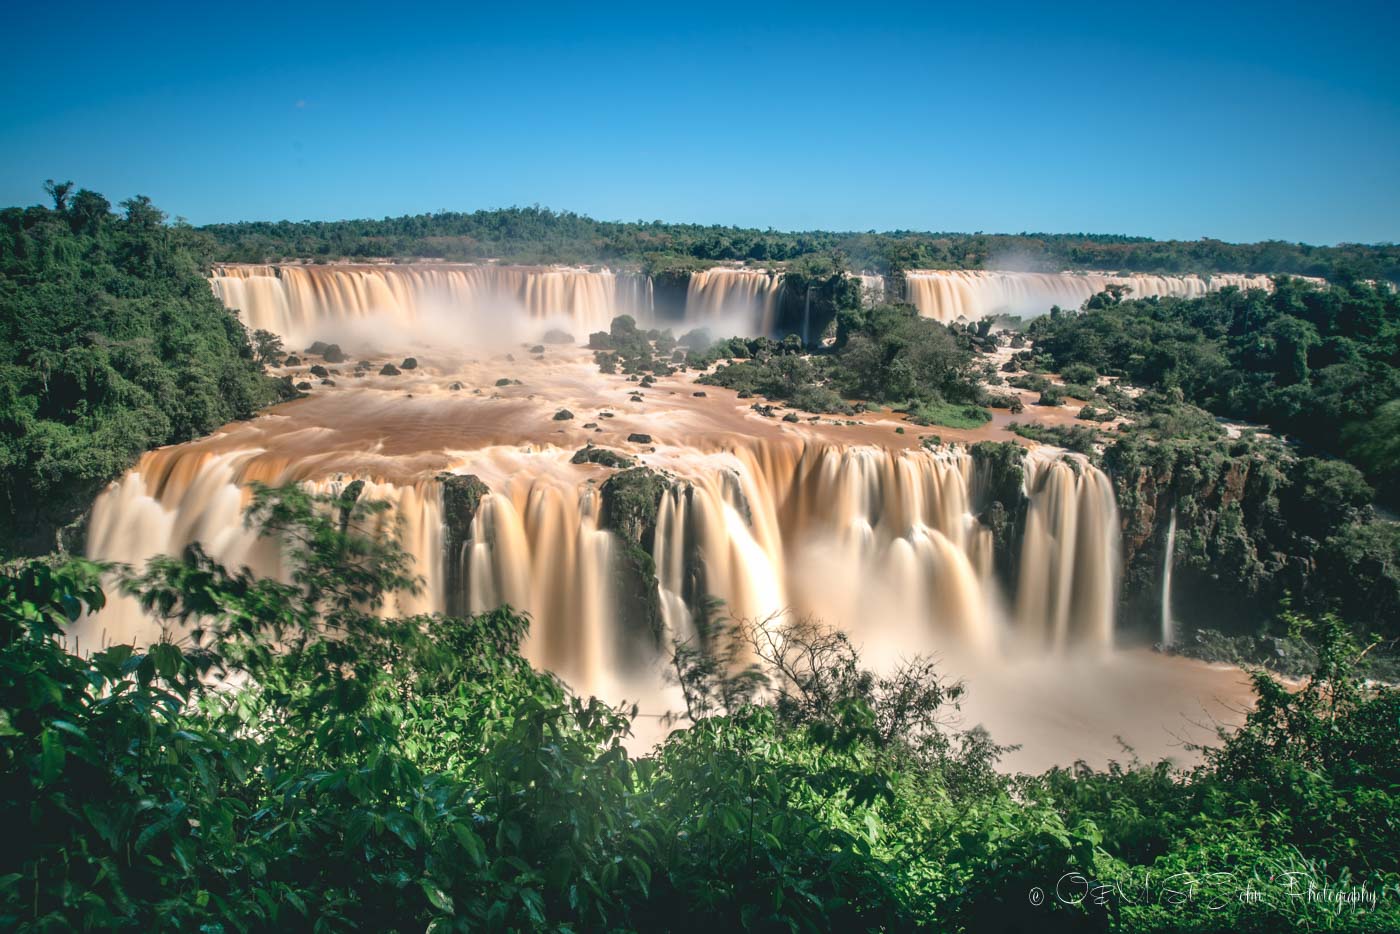 The iconic view of the Iguazu Falls along the trail